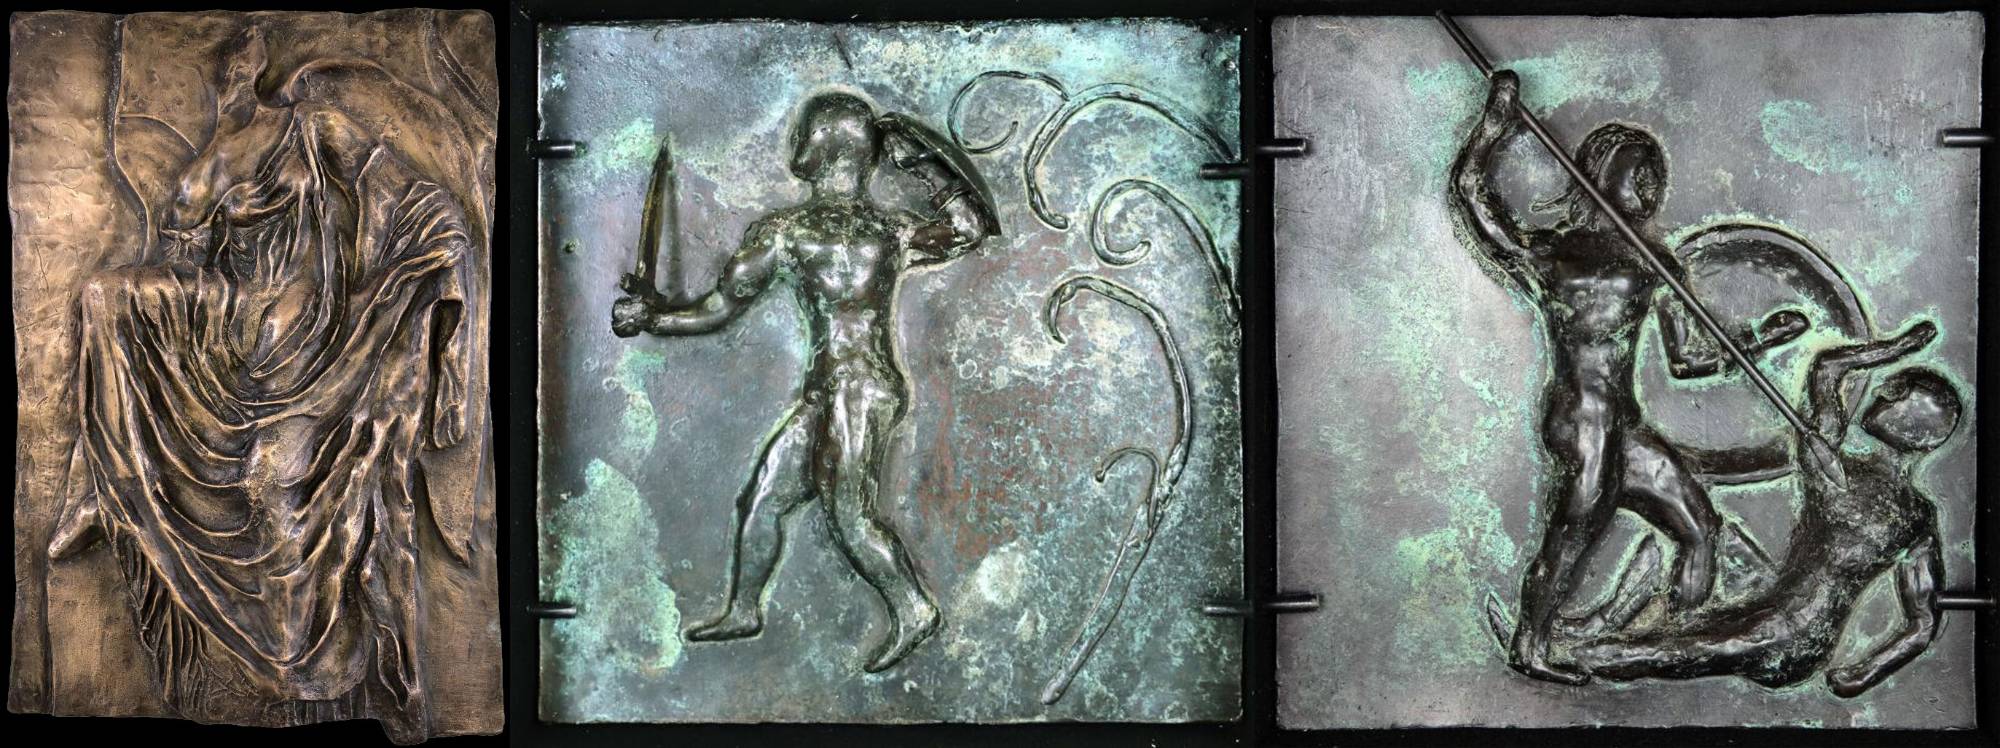 Three bronze relief sculptures of Ancient Greek gods and goddesses.